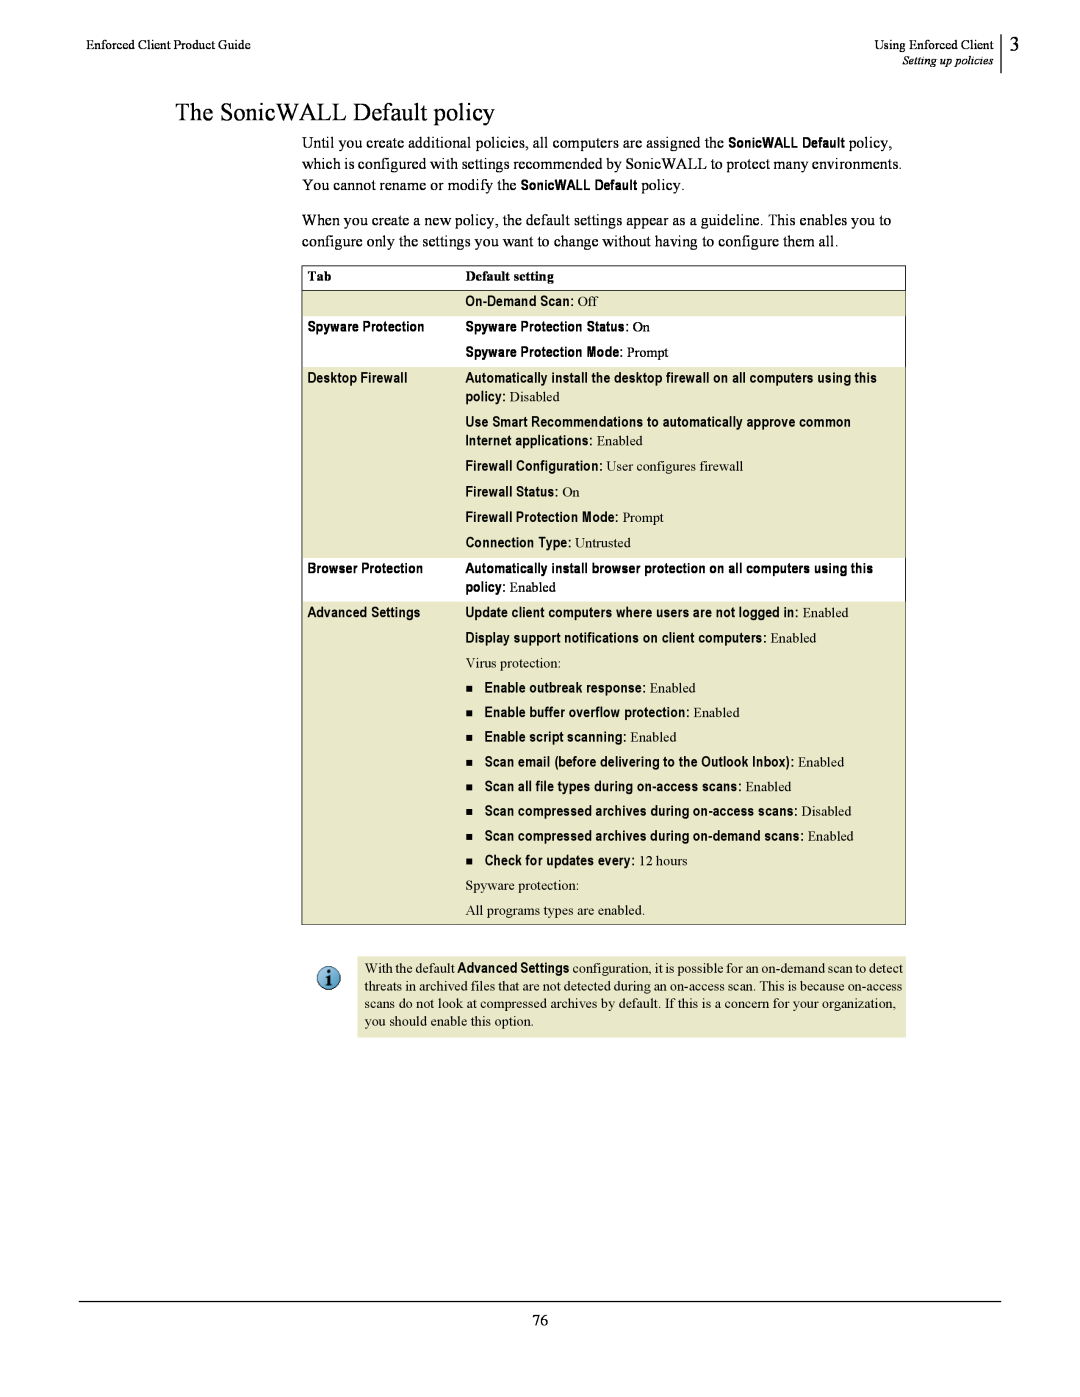 SonicWALL 4.5 manual The SonicWALL Default policy, Default setting, Virus protection, Spyware protection 